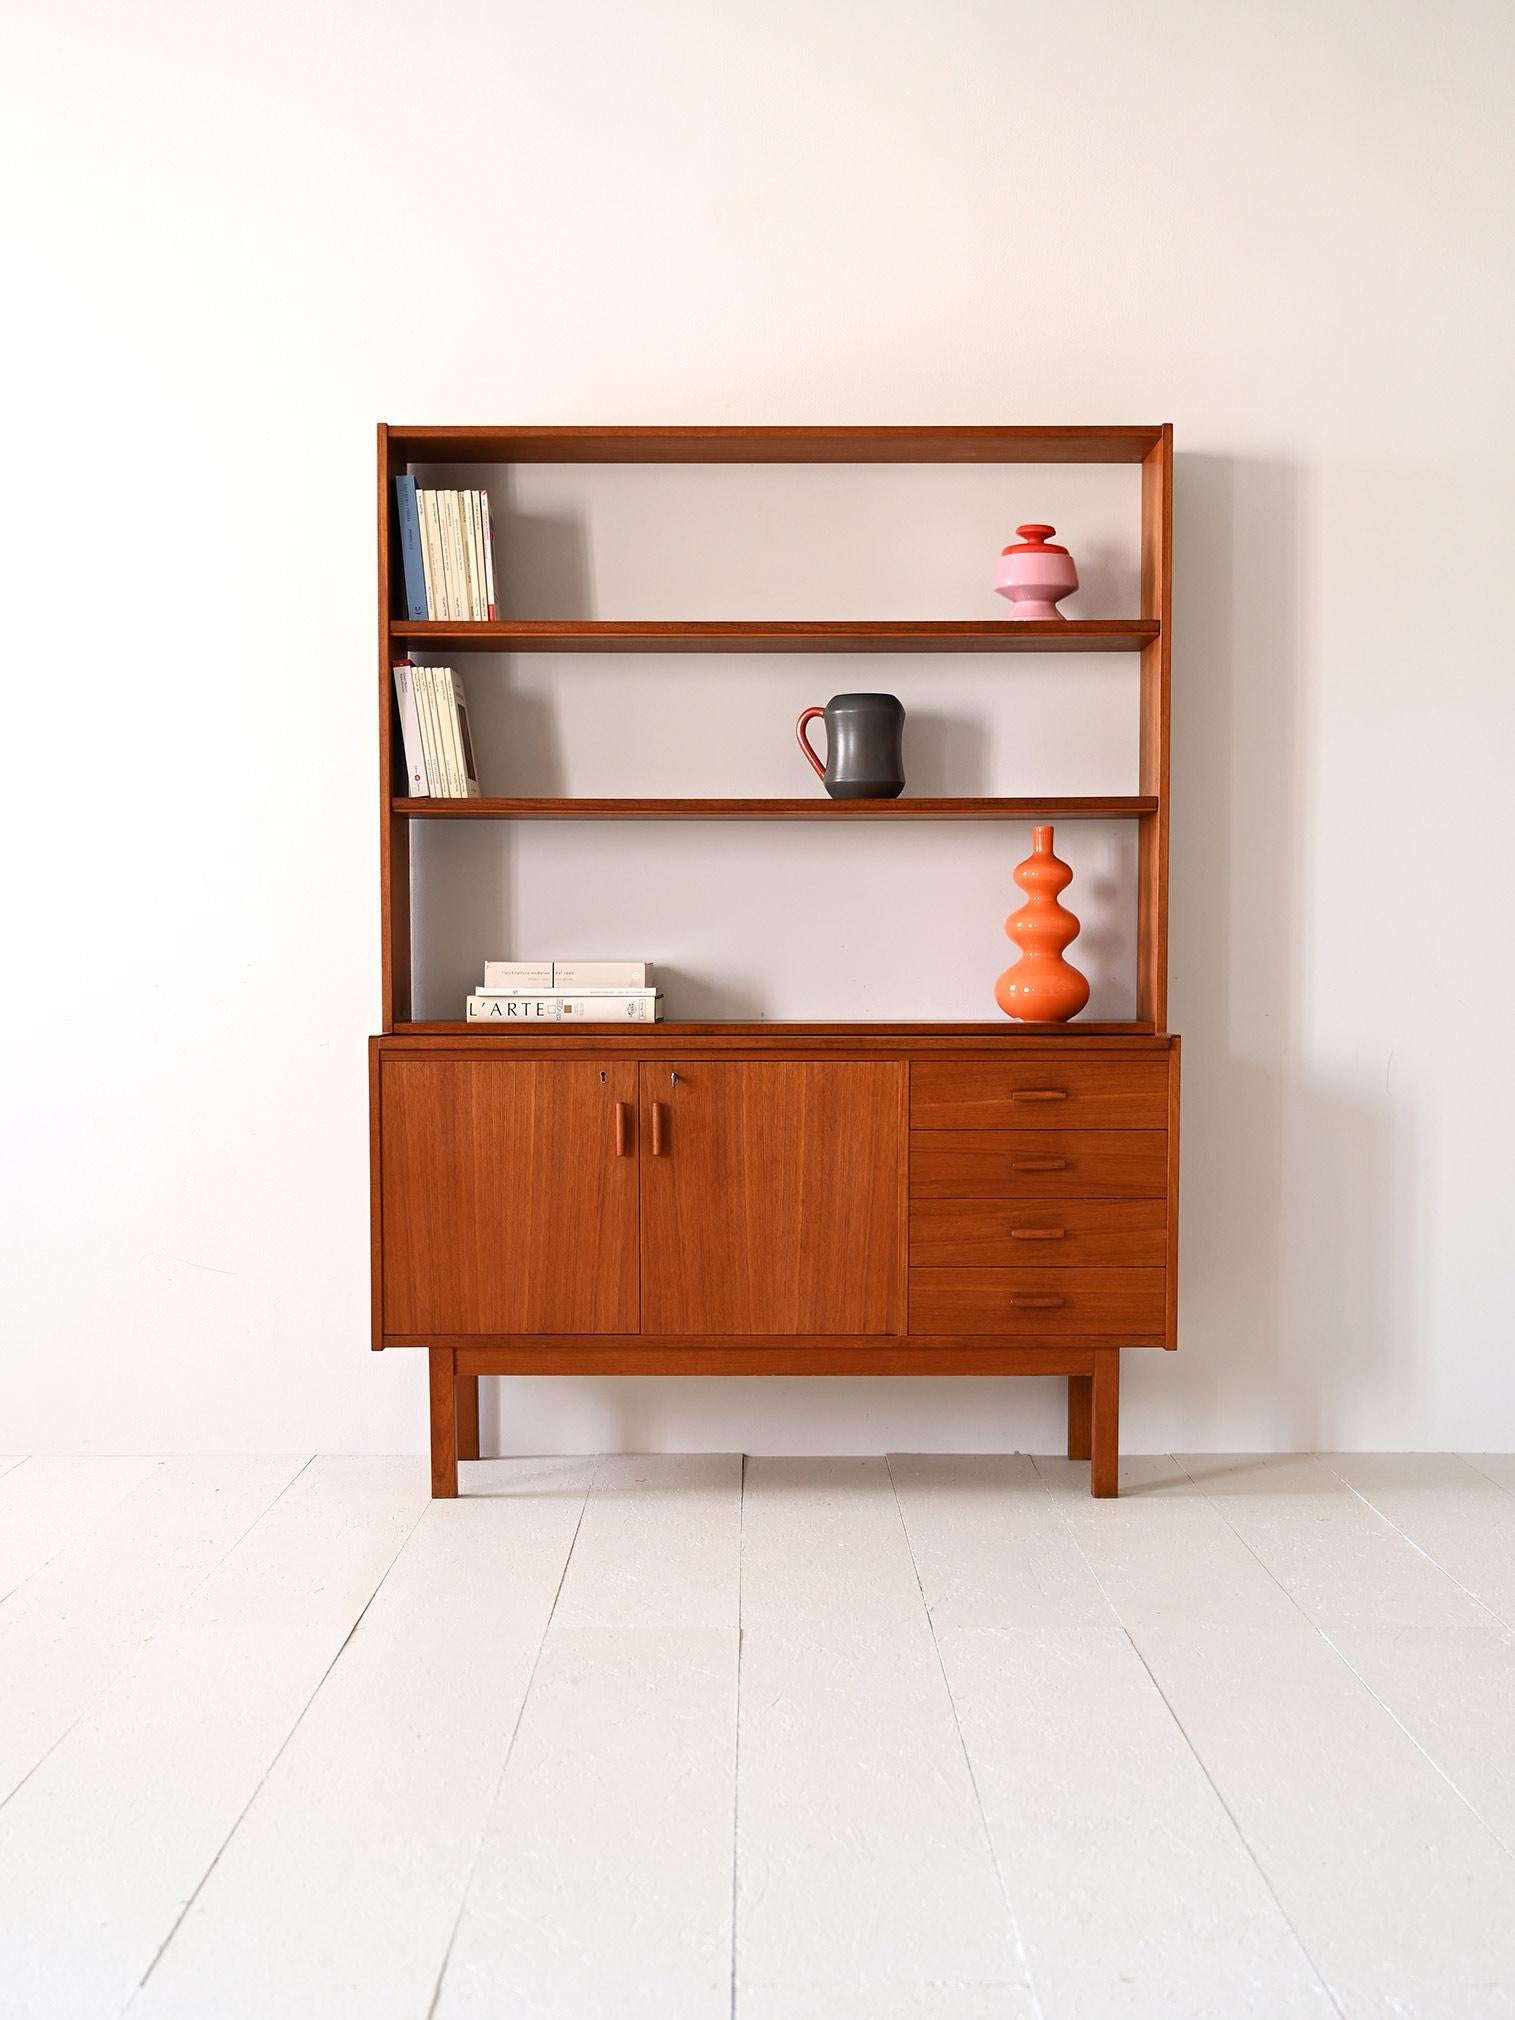 1960s teak cabinet with shelving and writing desk.

A simple and functional piece of furniture consisting of a sideboard with hinged doors and 4 drawers on which rests a frame with shelving. 
The essential lines are enriched by some details such as